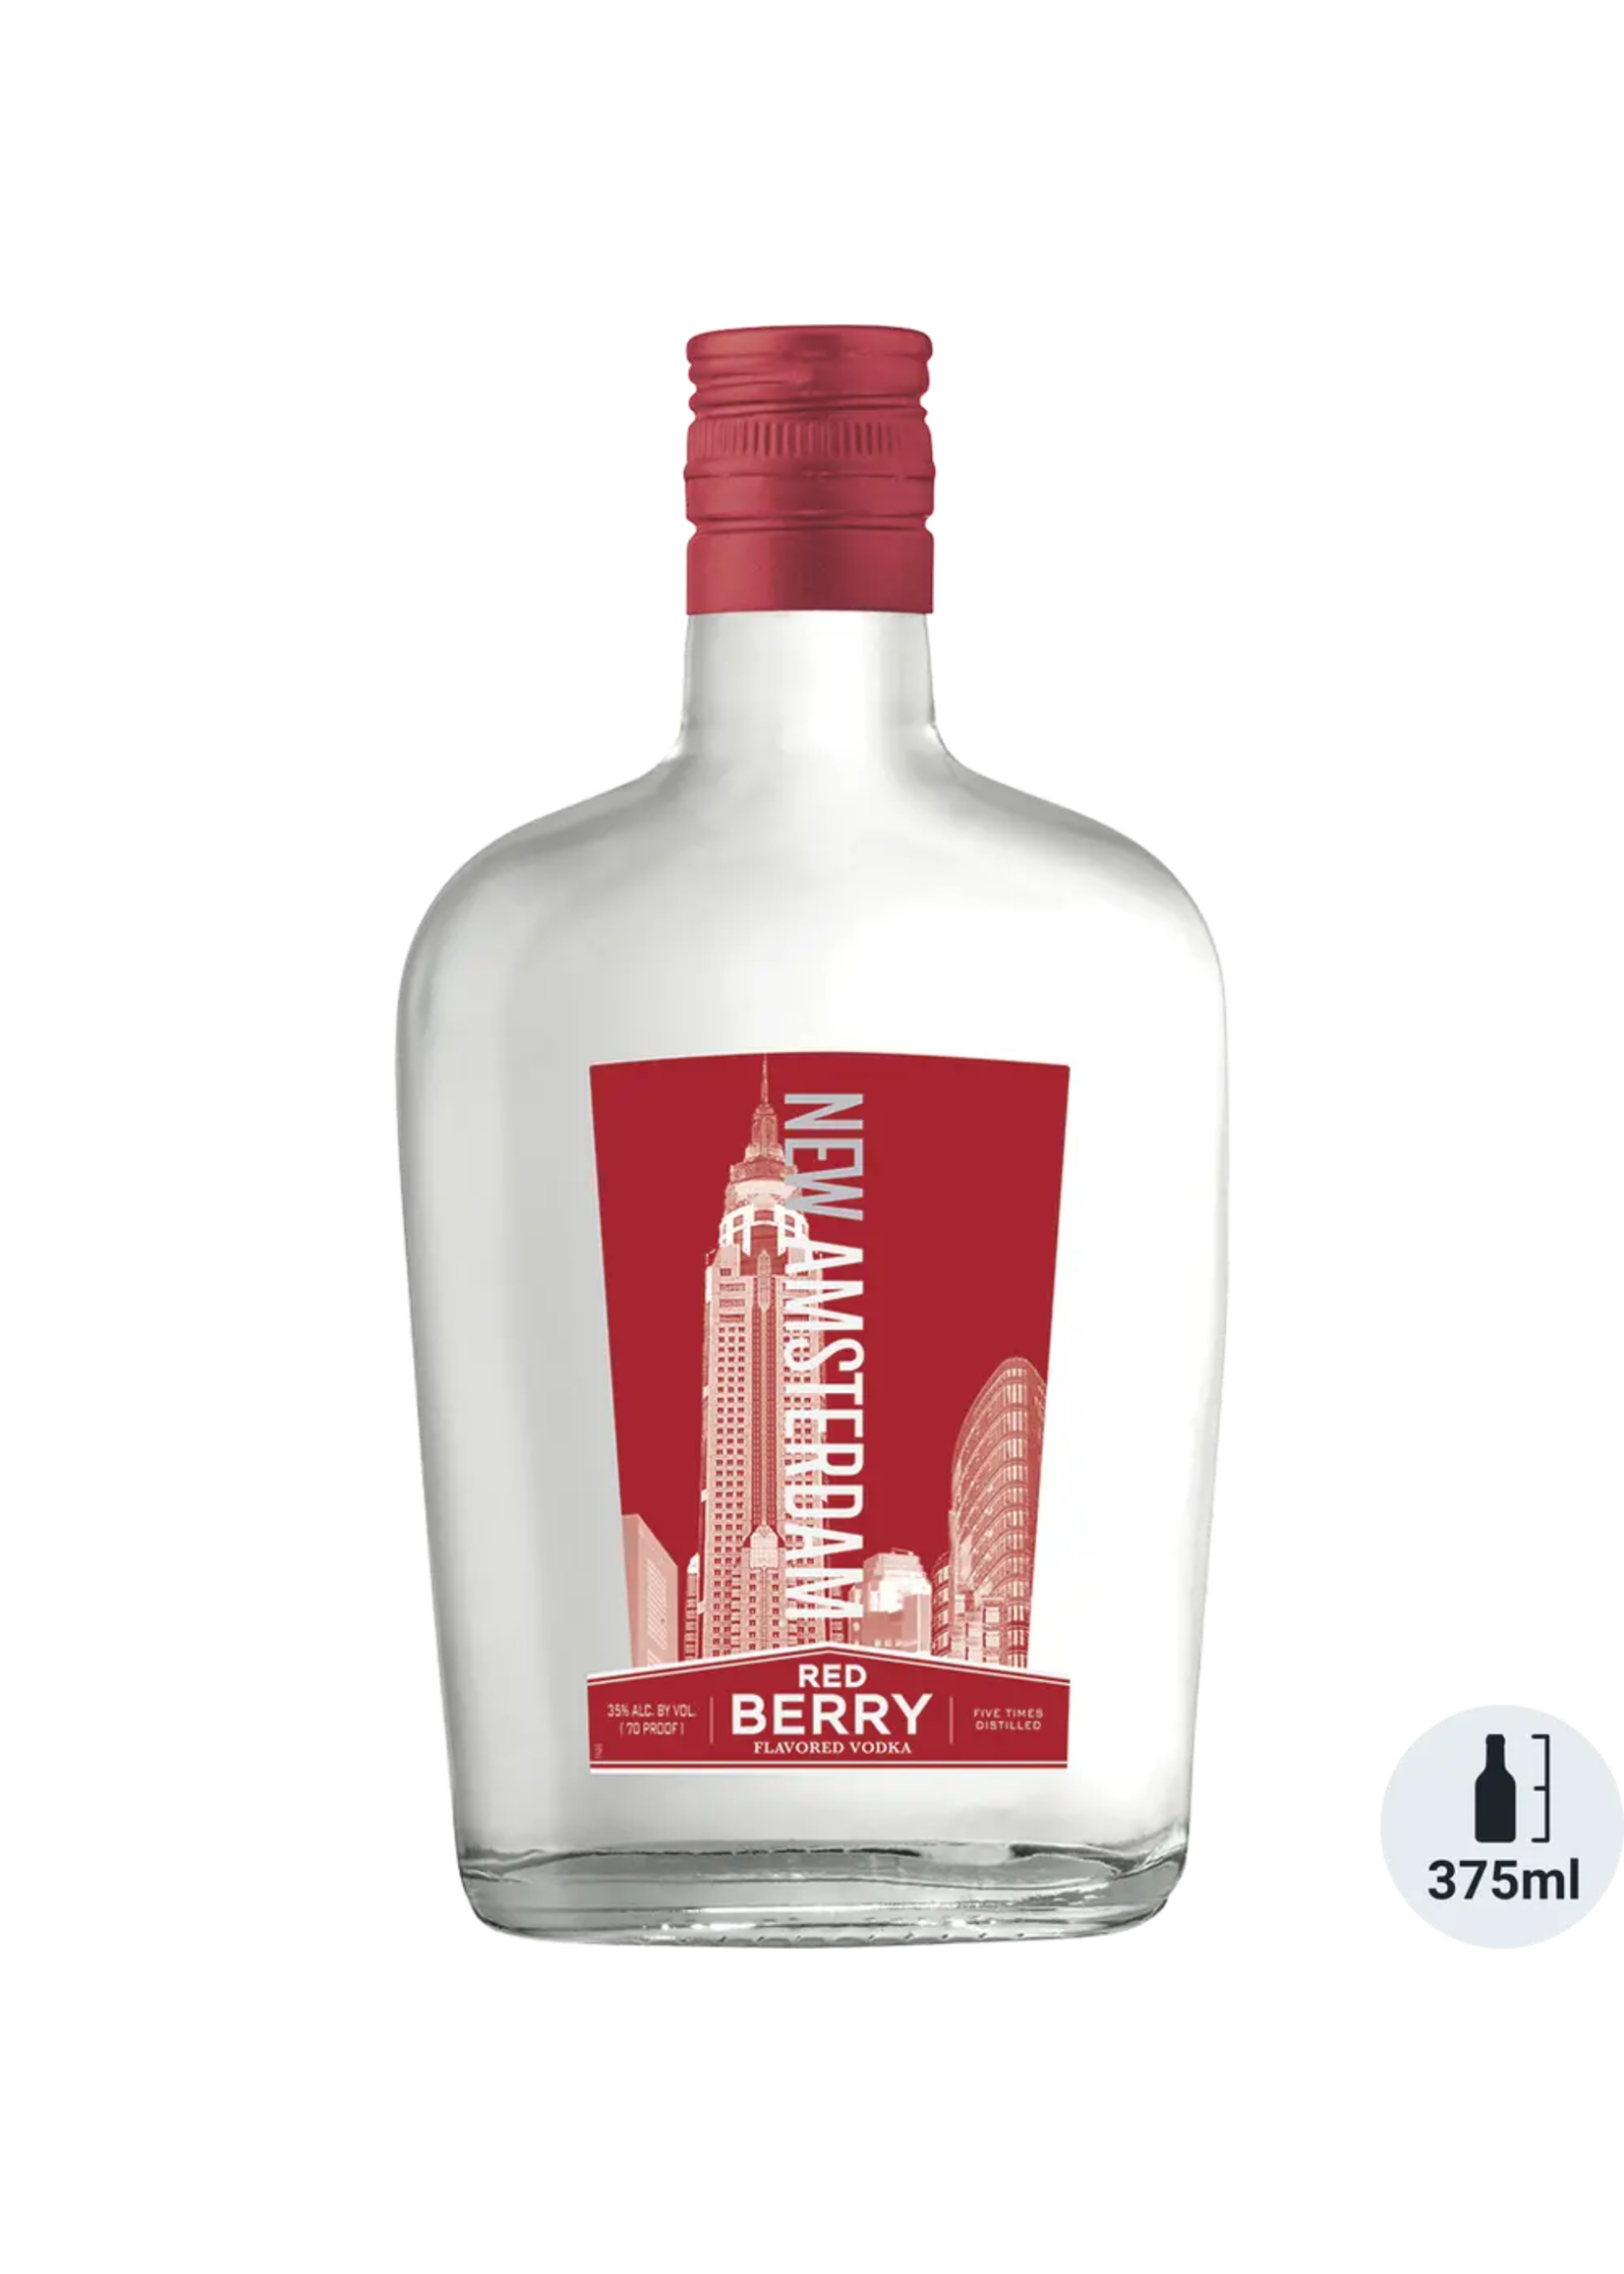 New Amsterdam Red Berry Flavored Vodka 70Proof 375ml